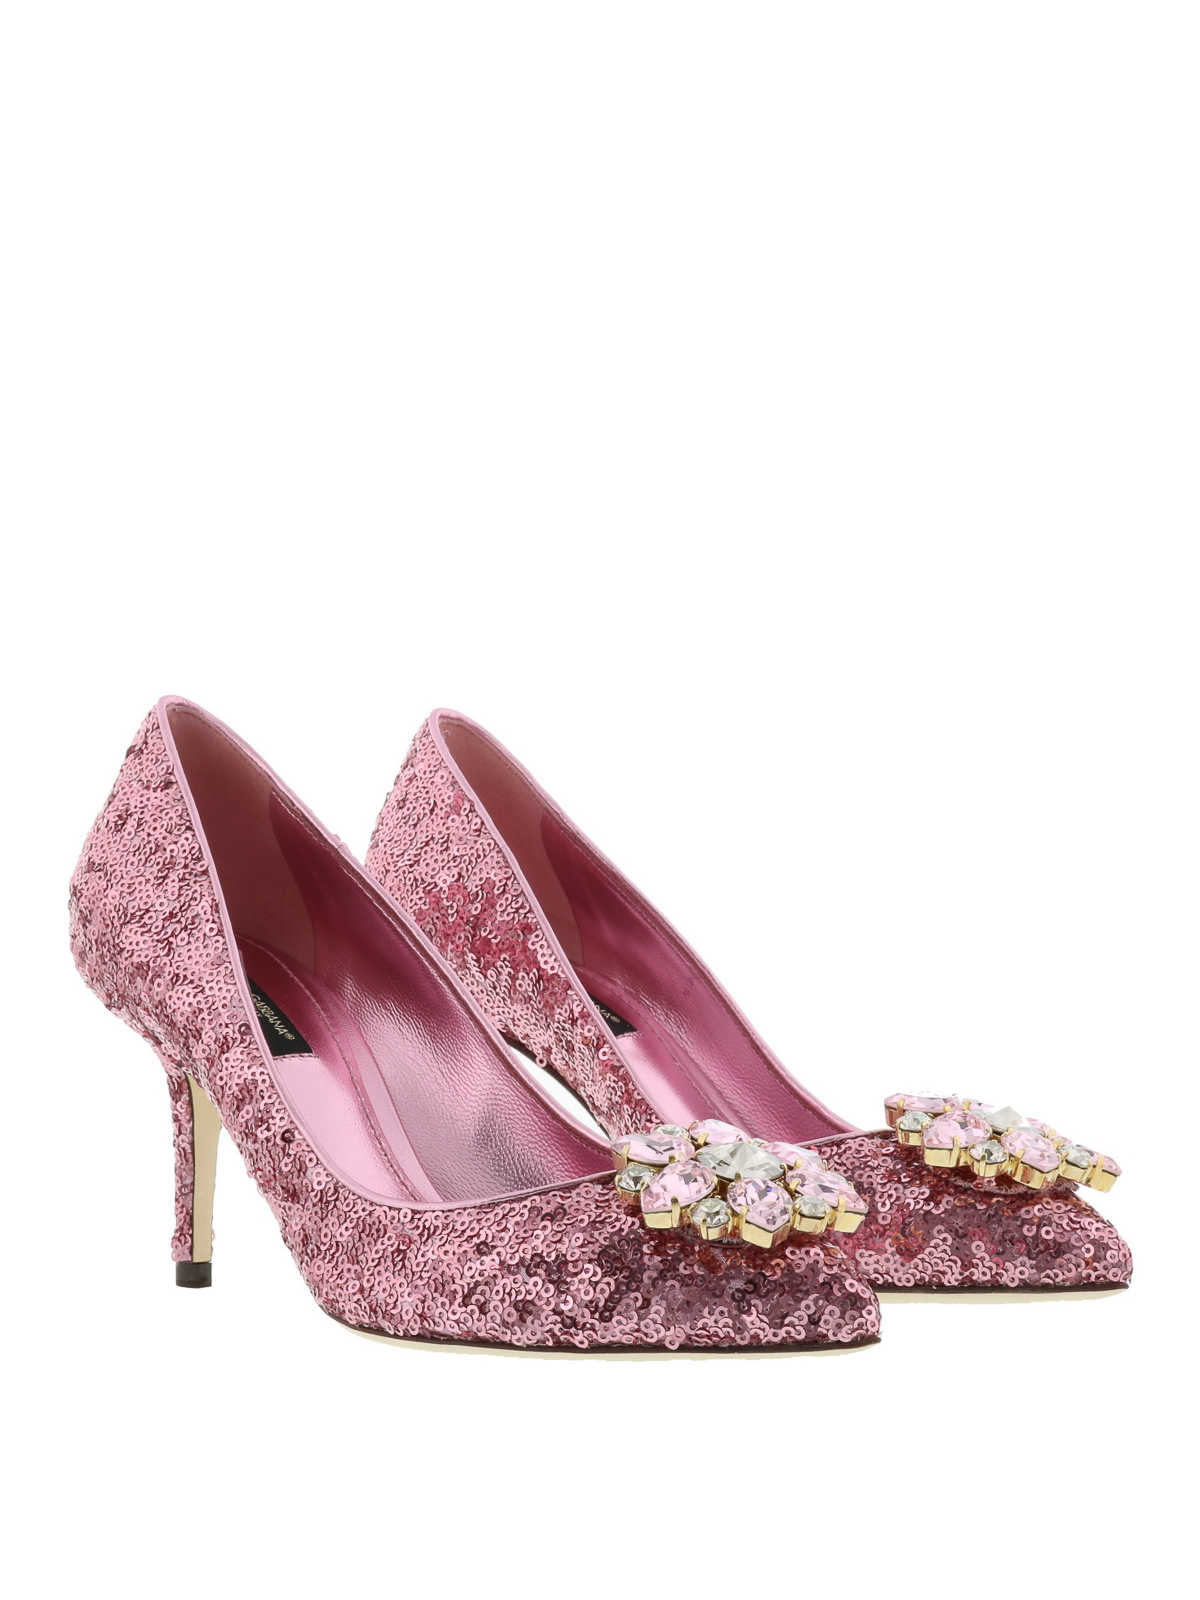 Dolce & Gabbana - Jewel sequined pumps - court shoes - CD0730AE72680400